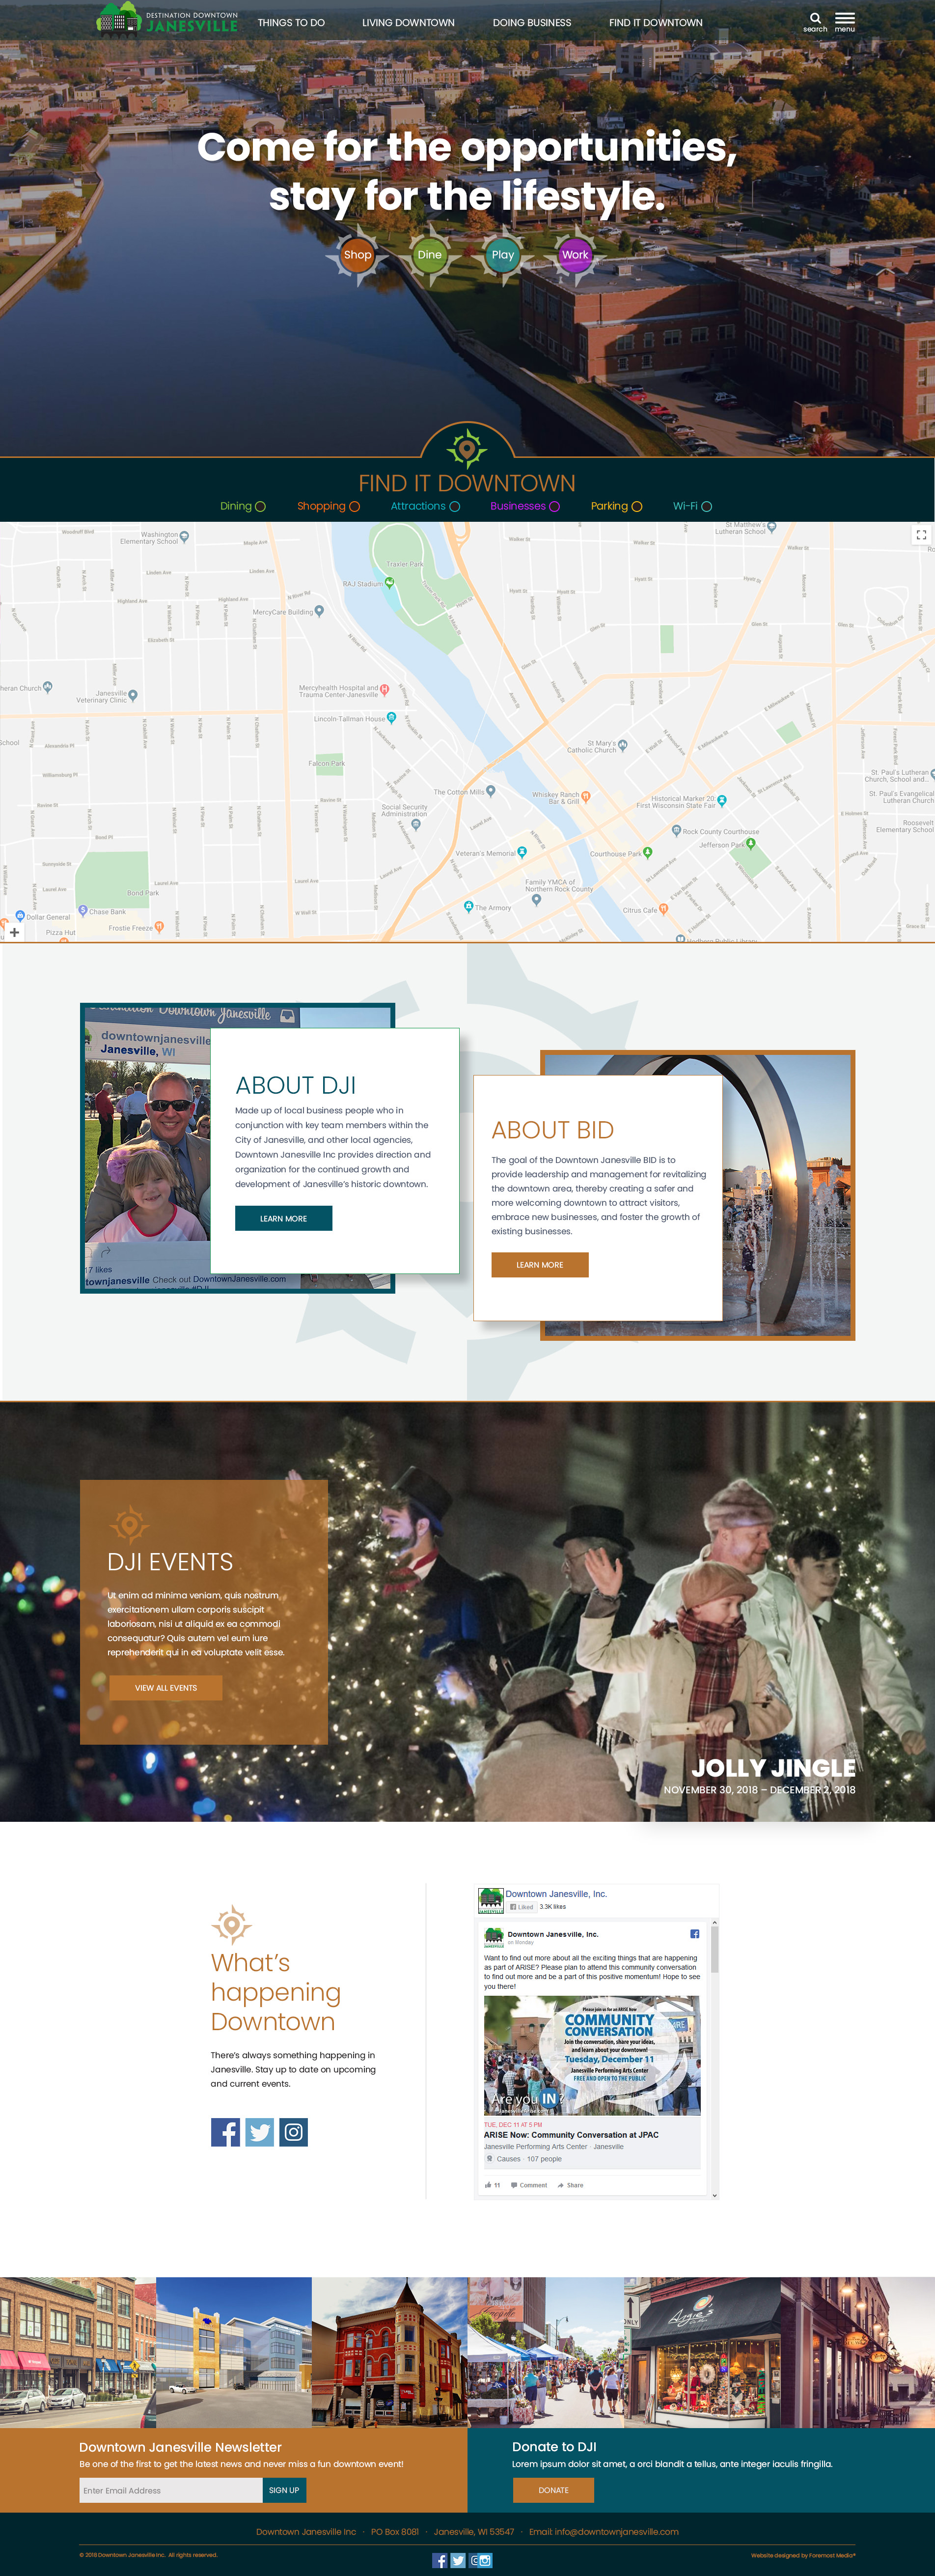 Example of the new and improved DNN website designed by Foremost Media for Destination Downtown Janesville